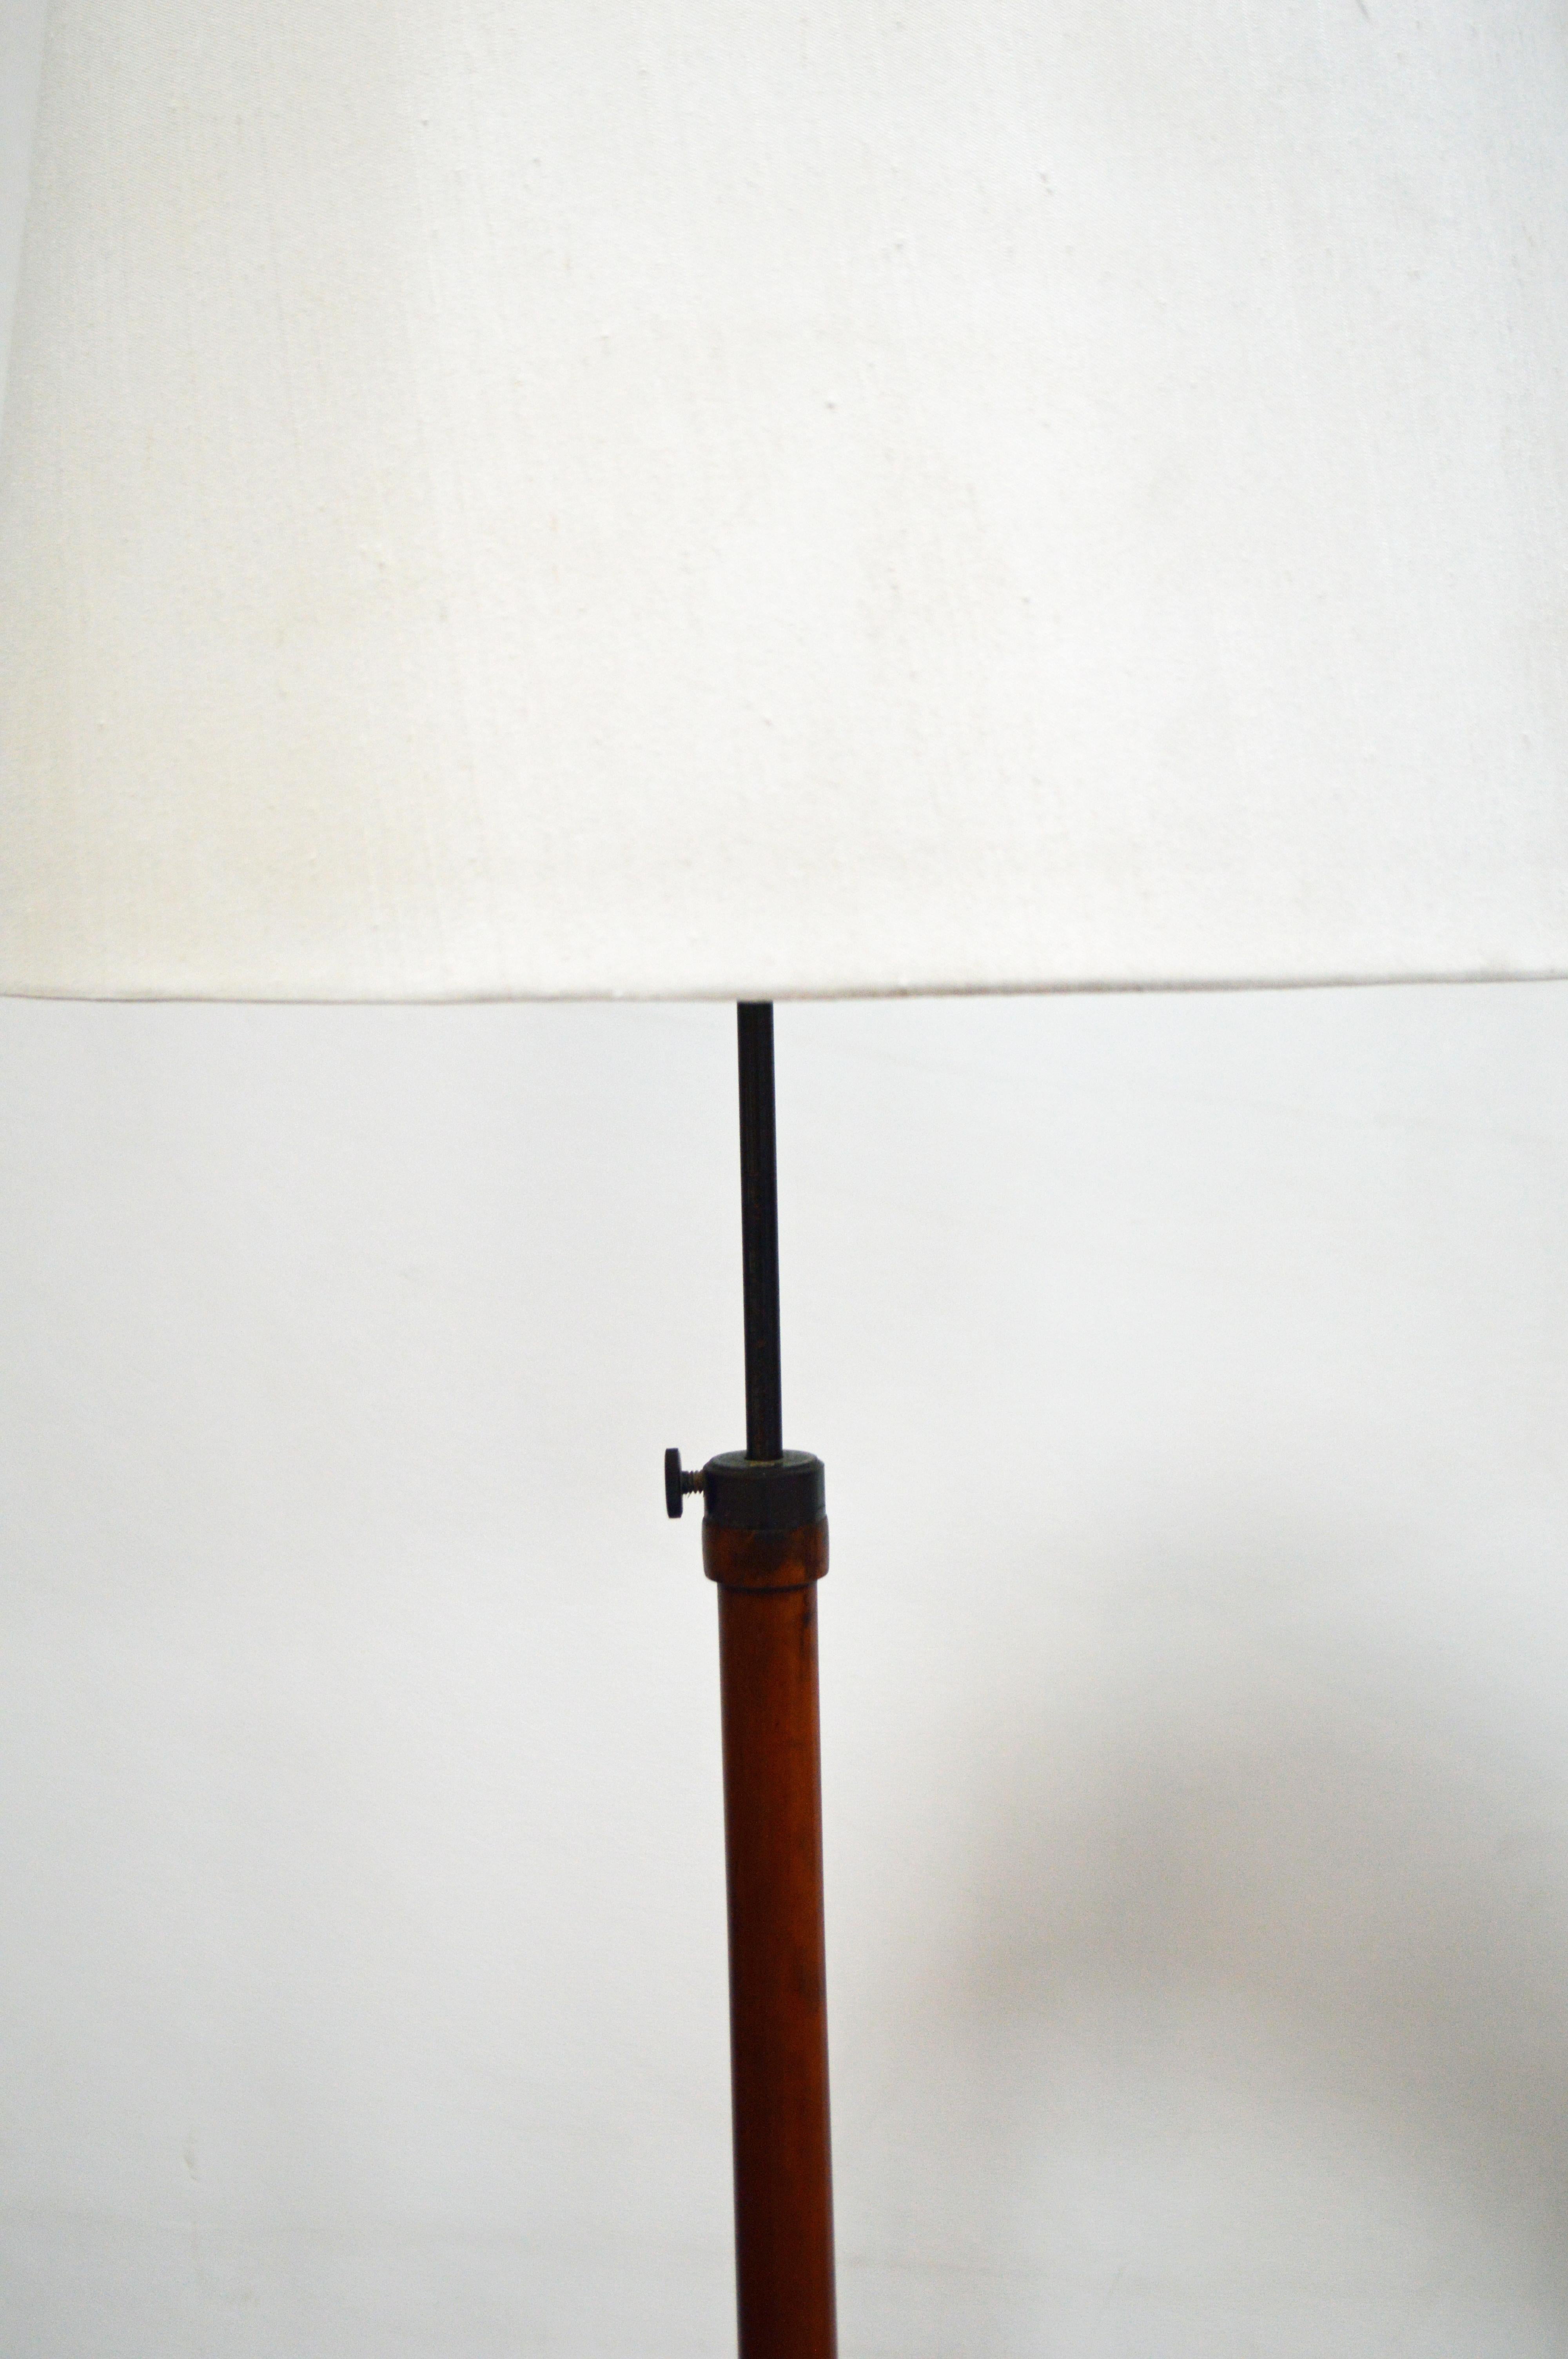 Very handsome and sleek Art Deco floor lamp in excellent restored condition. The overall height is adjustable to higher and lower positions. The base measures 11” in diameter and is comprised of flame birch and chrome with an ebonized ball detail.